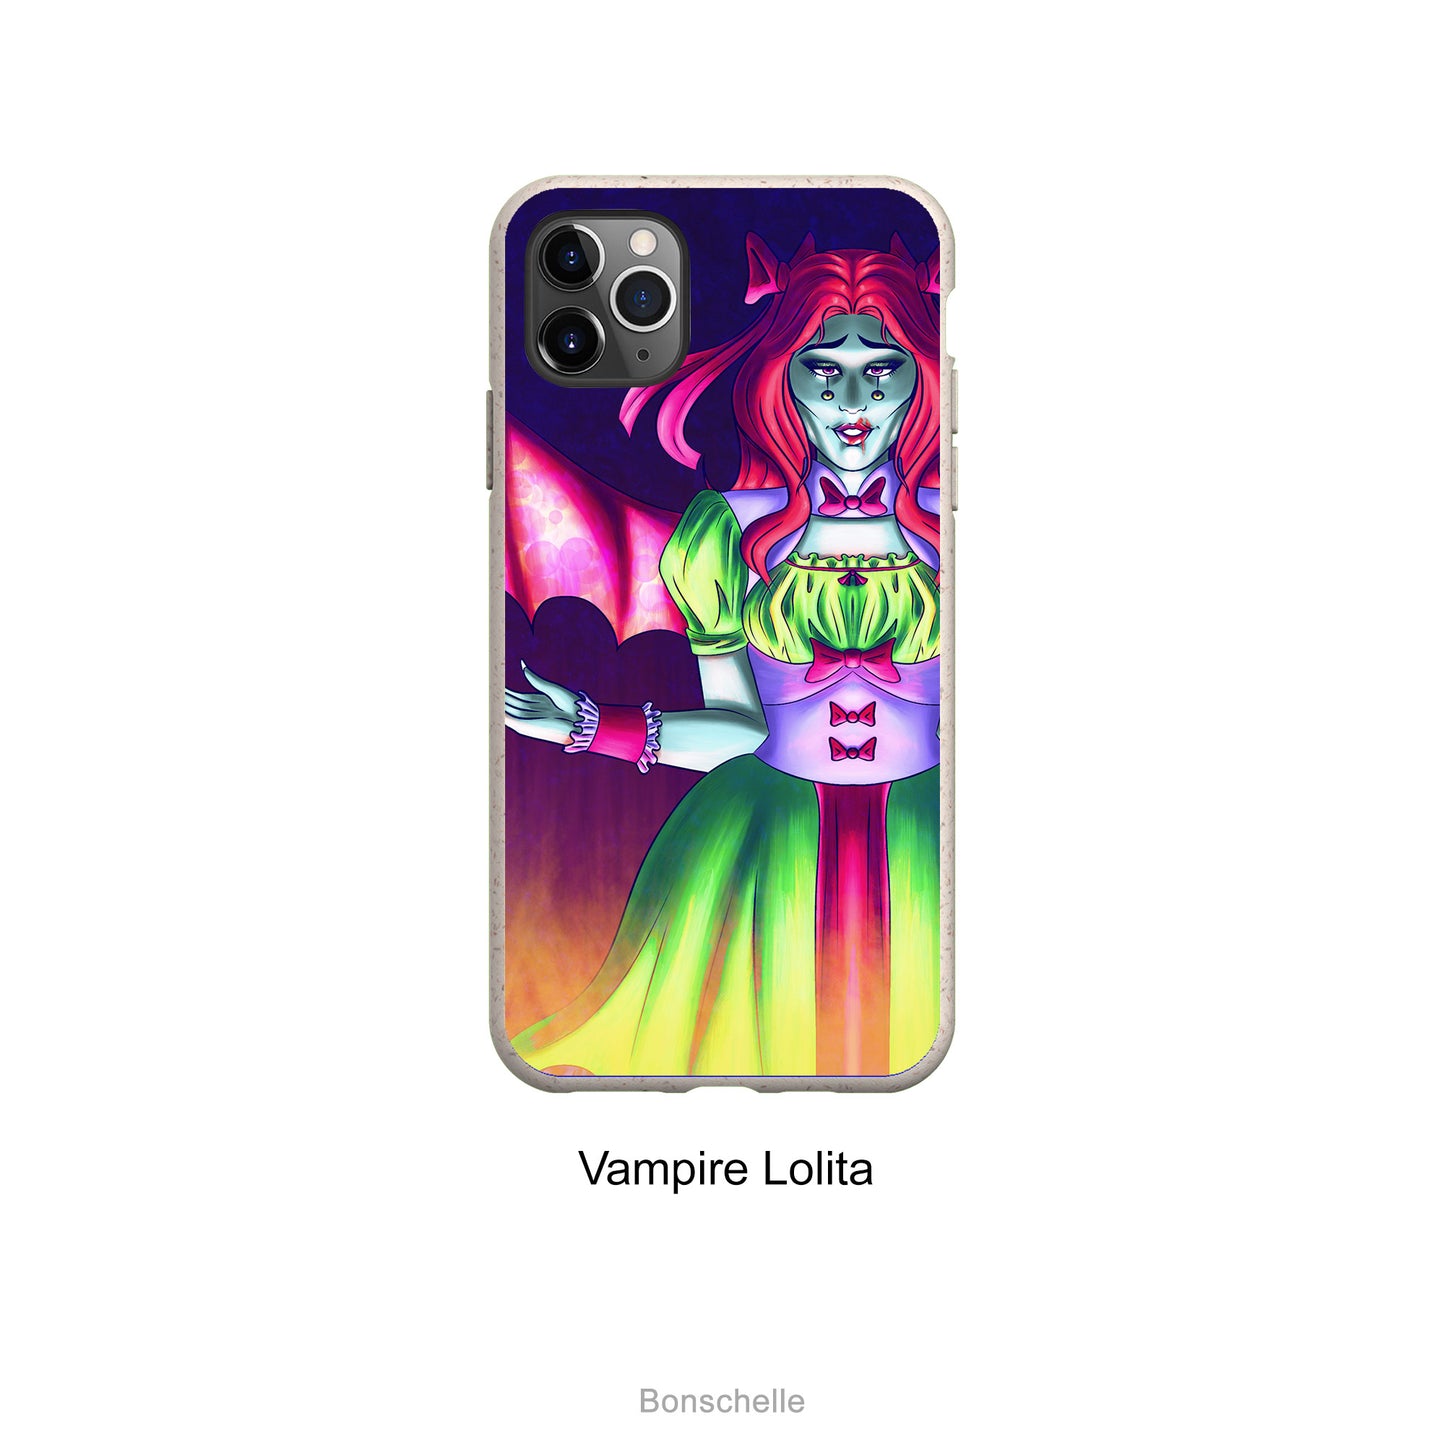 'Vampire Lolita' option for Colourful Fantasy Witch Eco Phone Cases